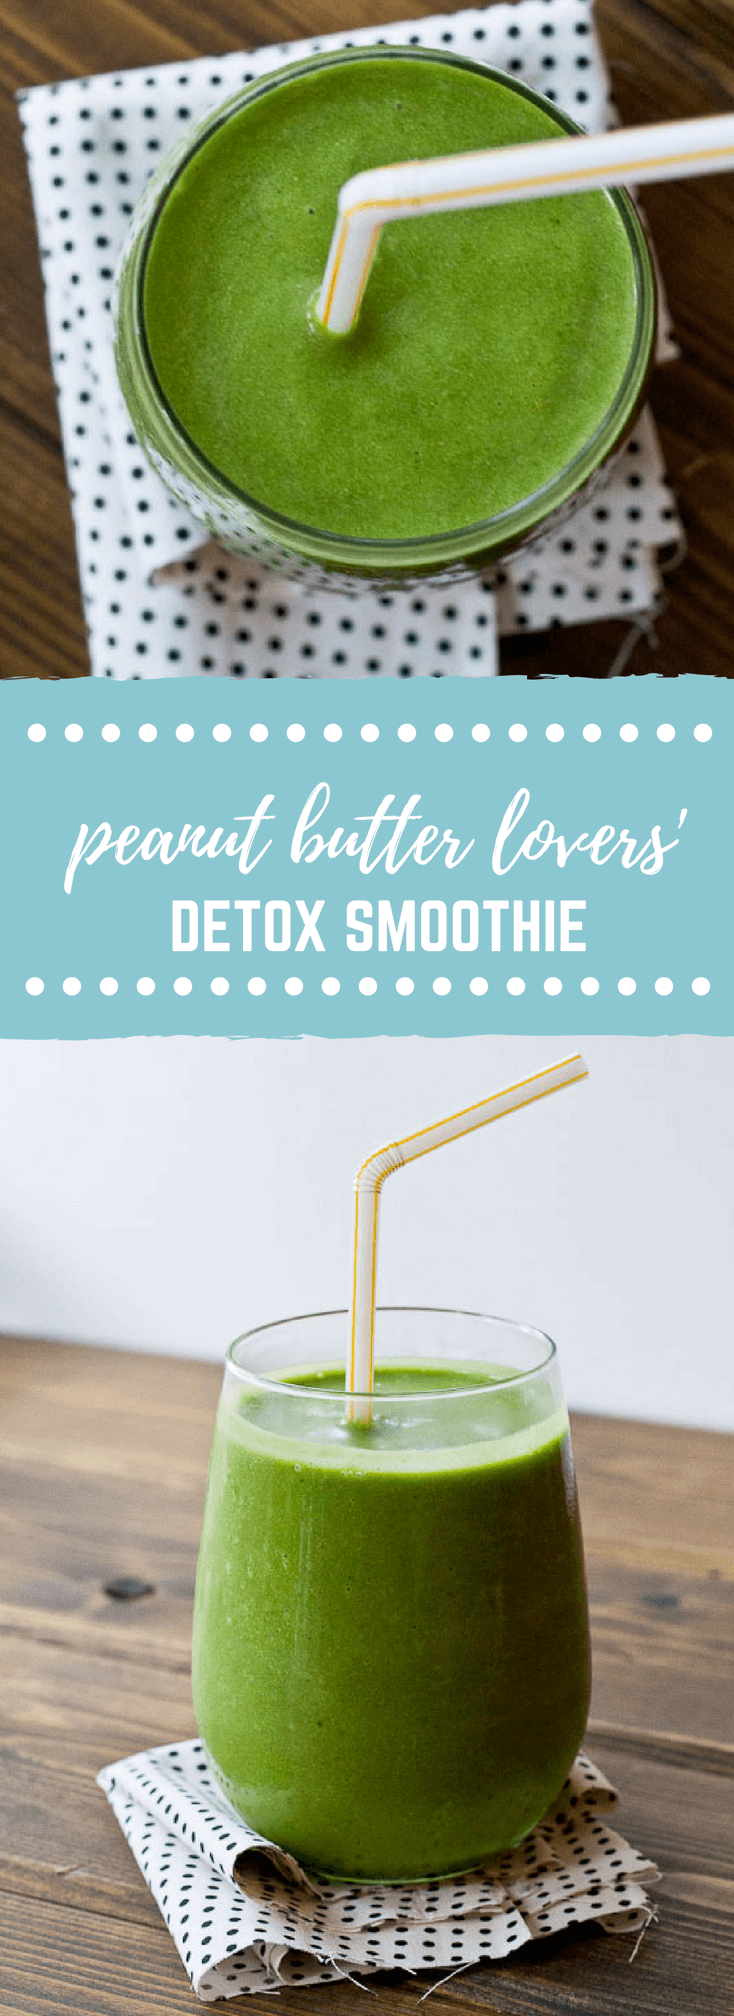 Peanut butter lovers beware: this PB Lovers' Detox Smoothie will have you weak in the knees. Grab a straw, you PB crazies and get your detox on!